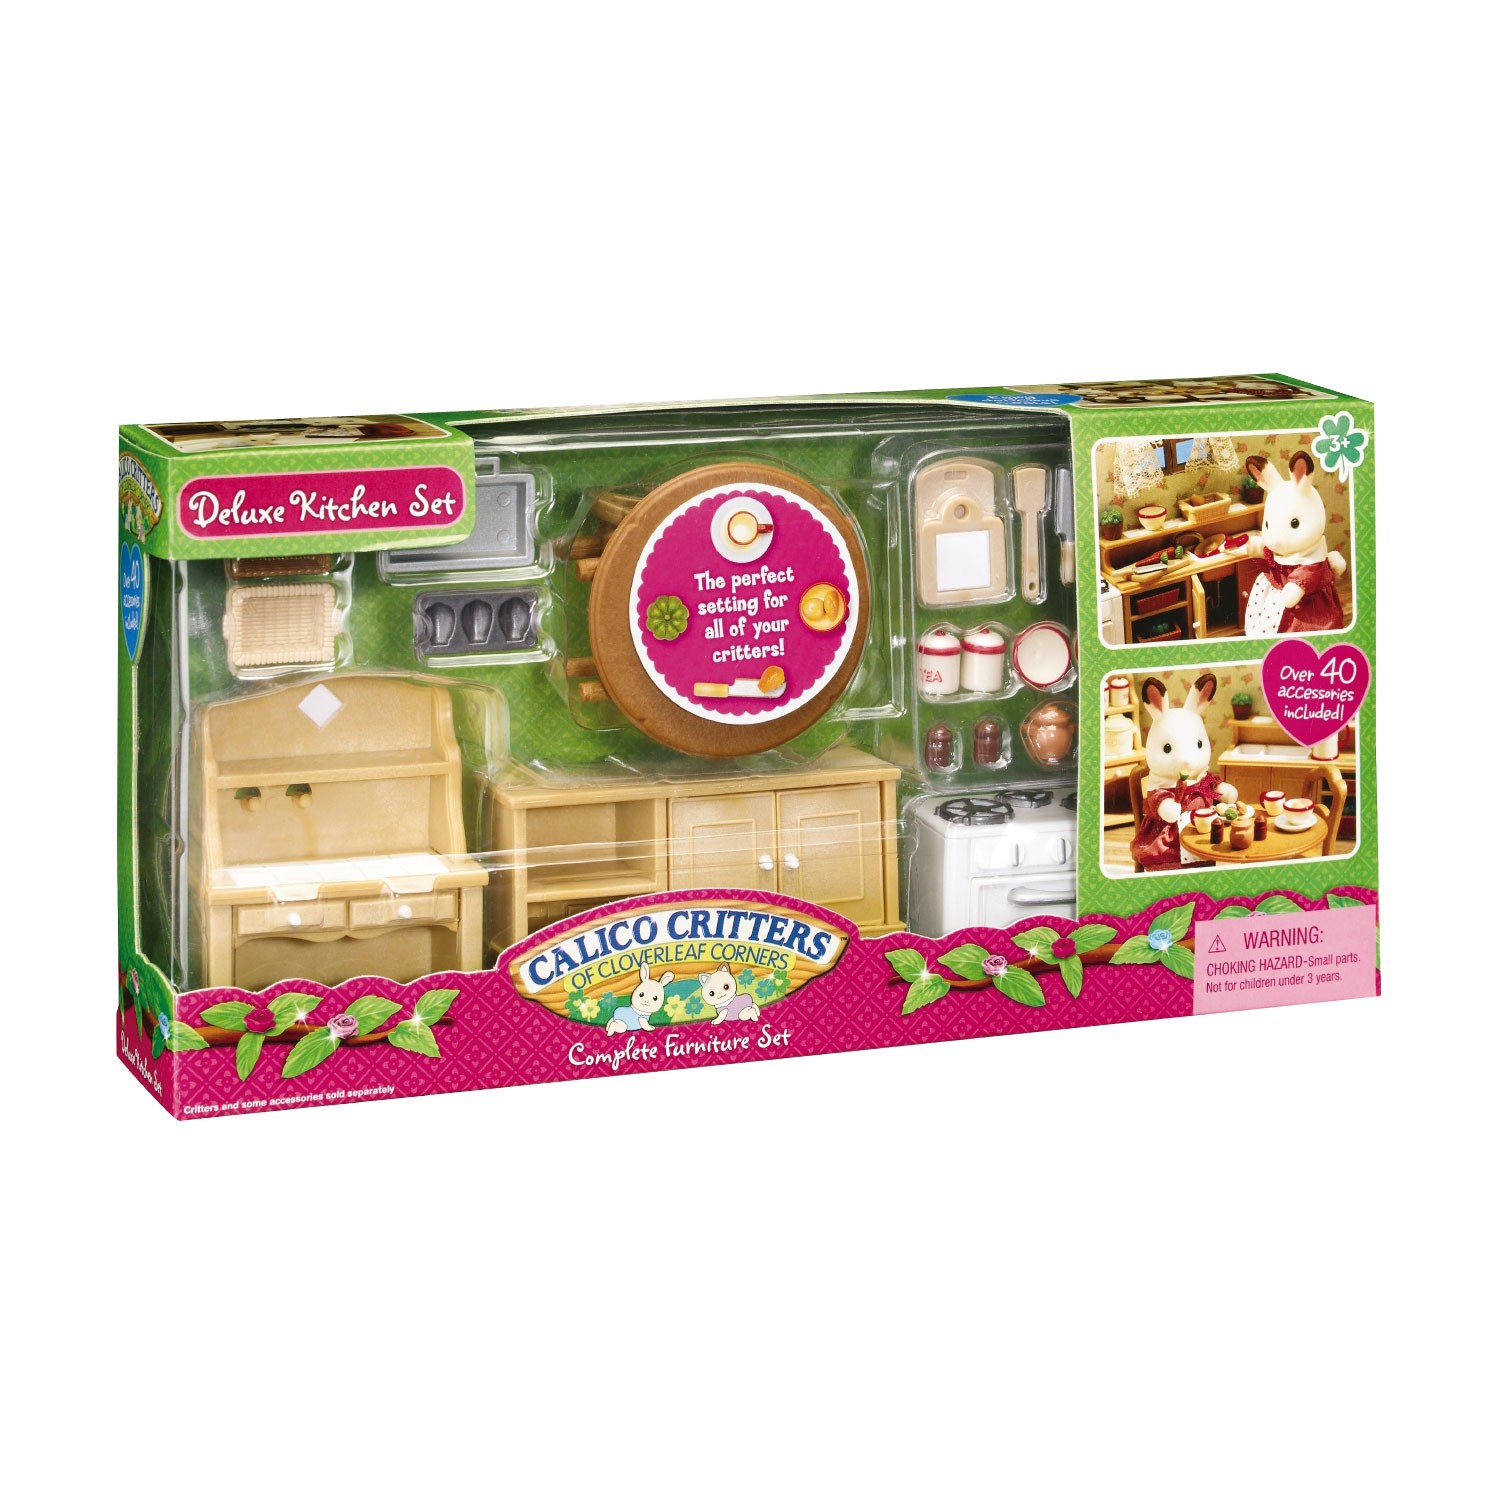 Calico Critters Deluxe Kitchen Set Packaging